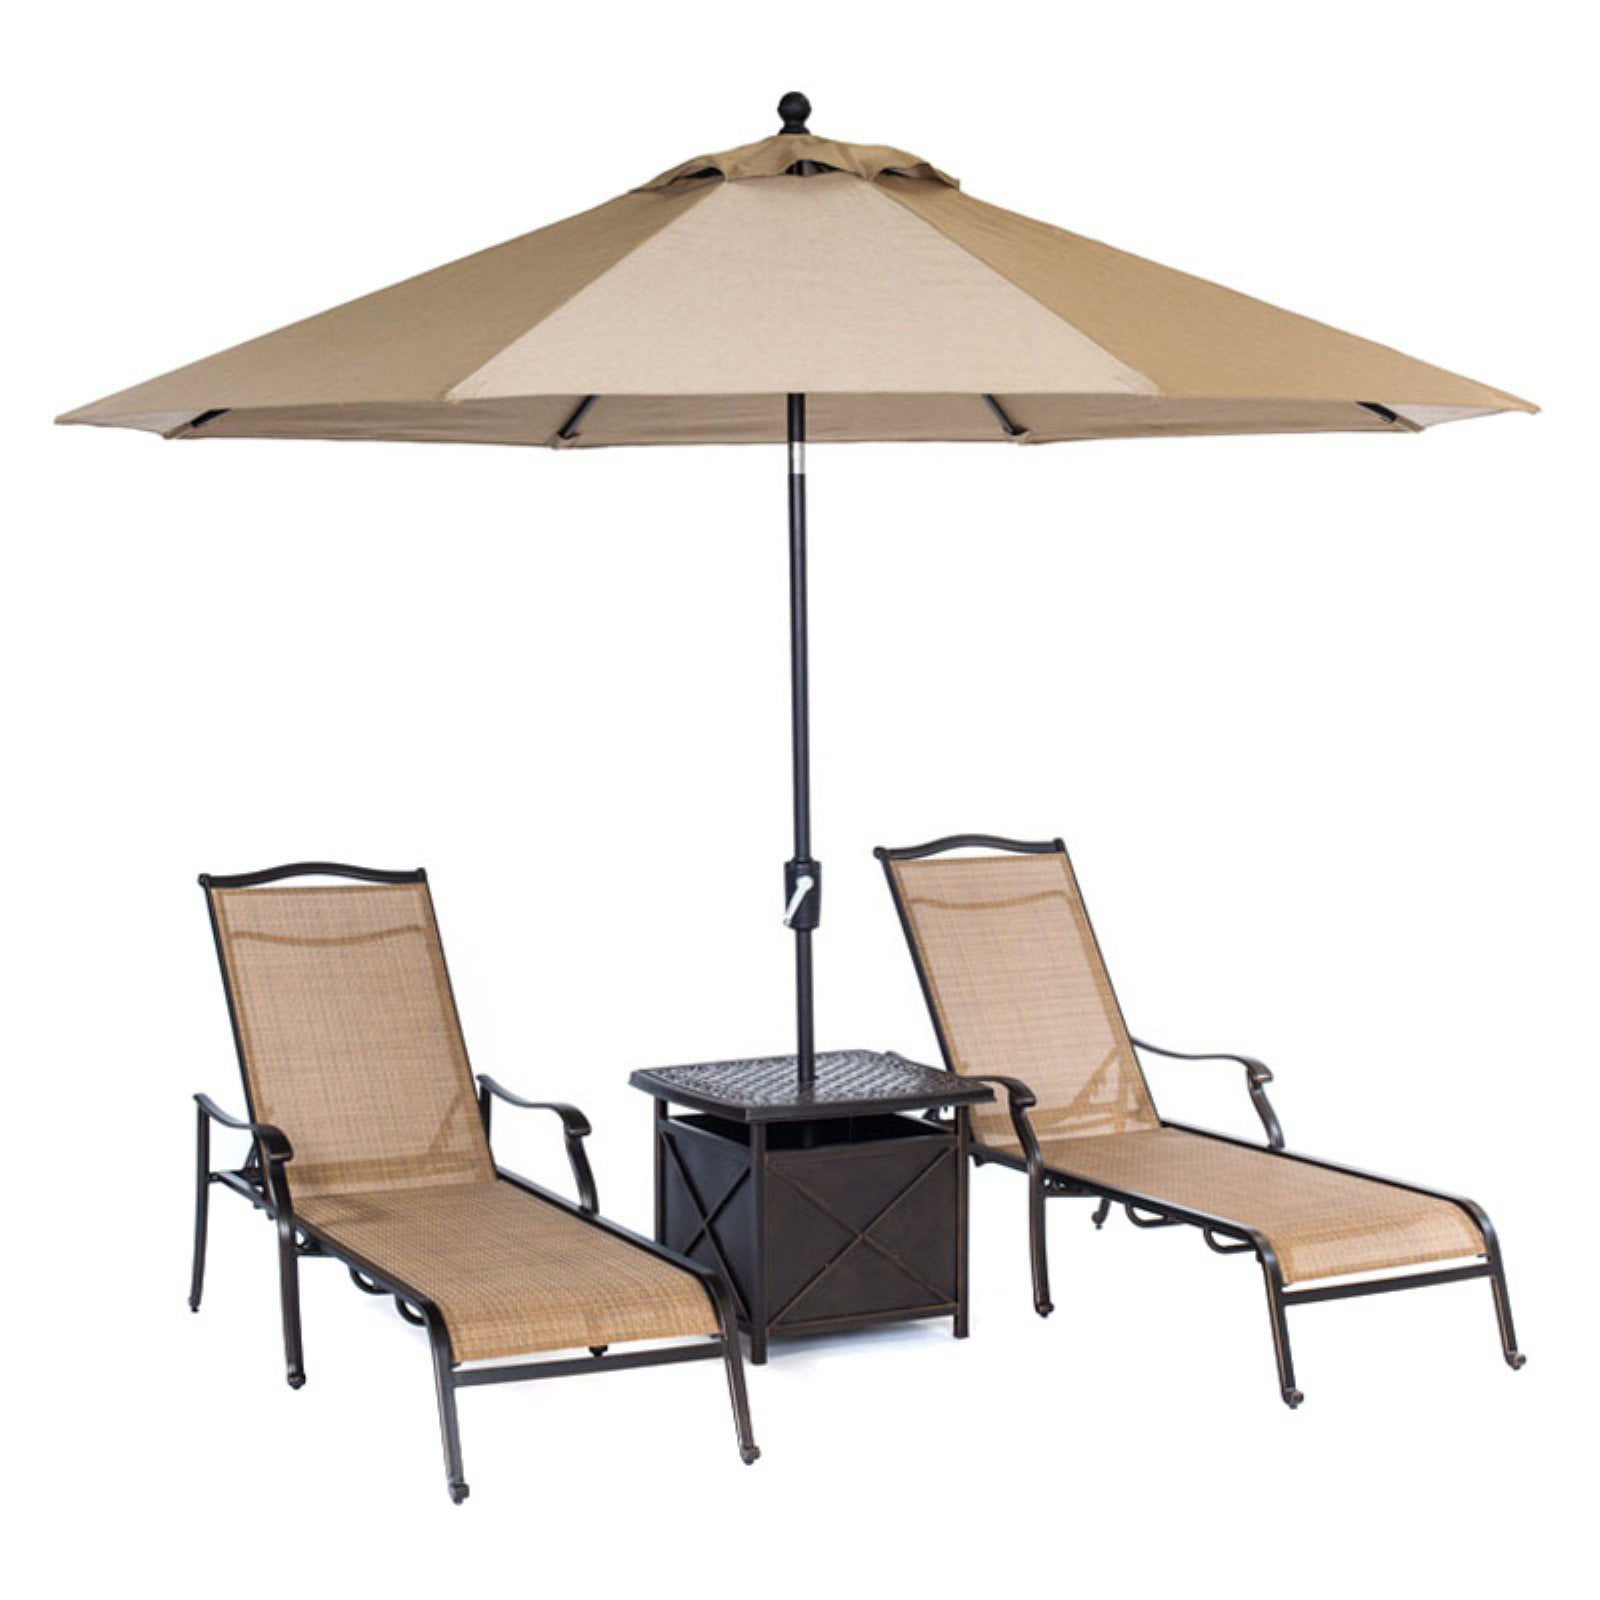 Hanover Outdoor Monaco Chaise Lounge Set with 11' Umbrella and Side